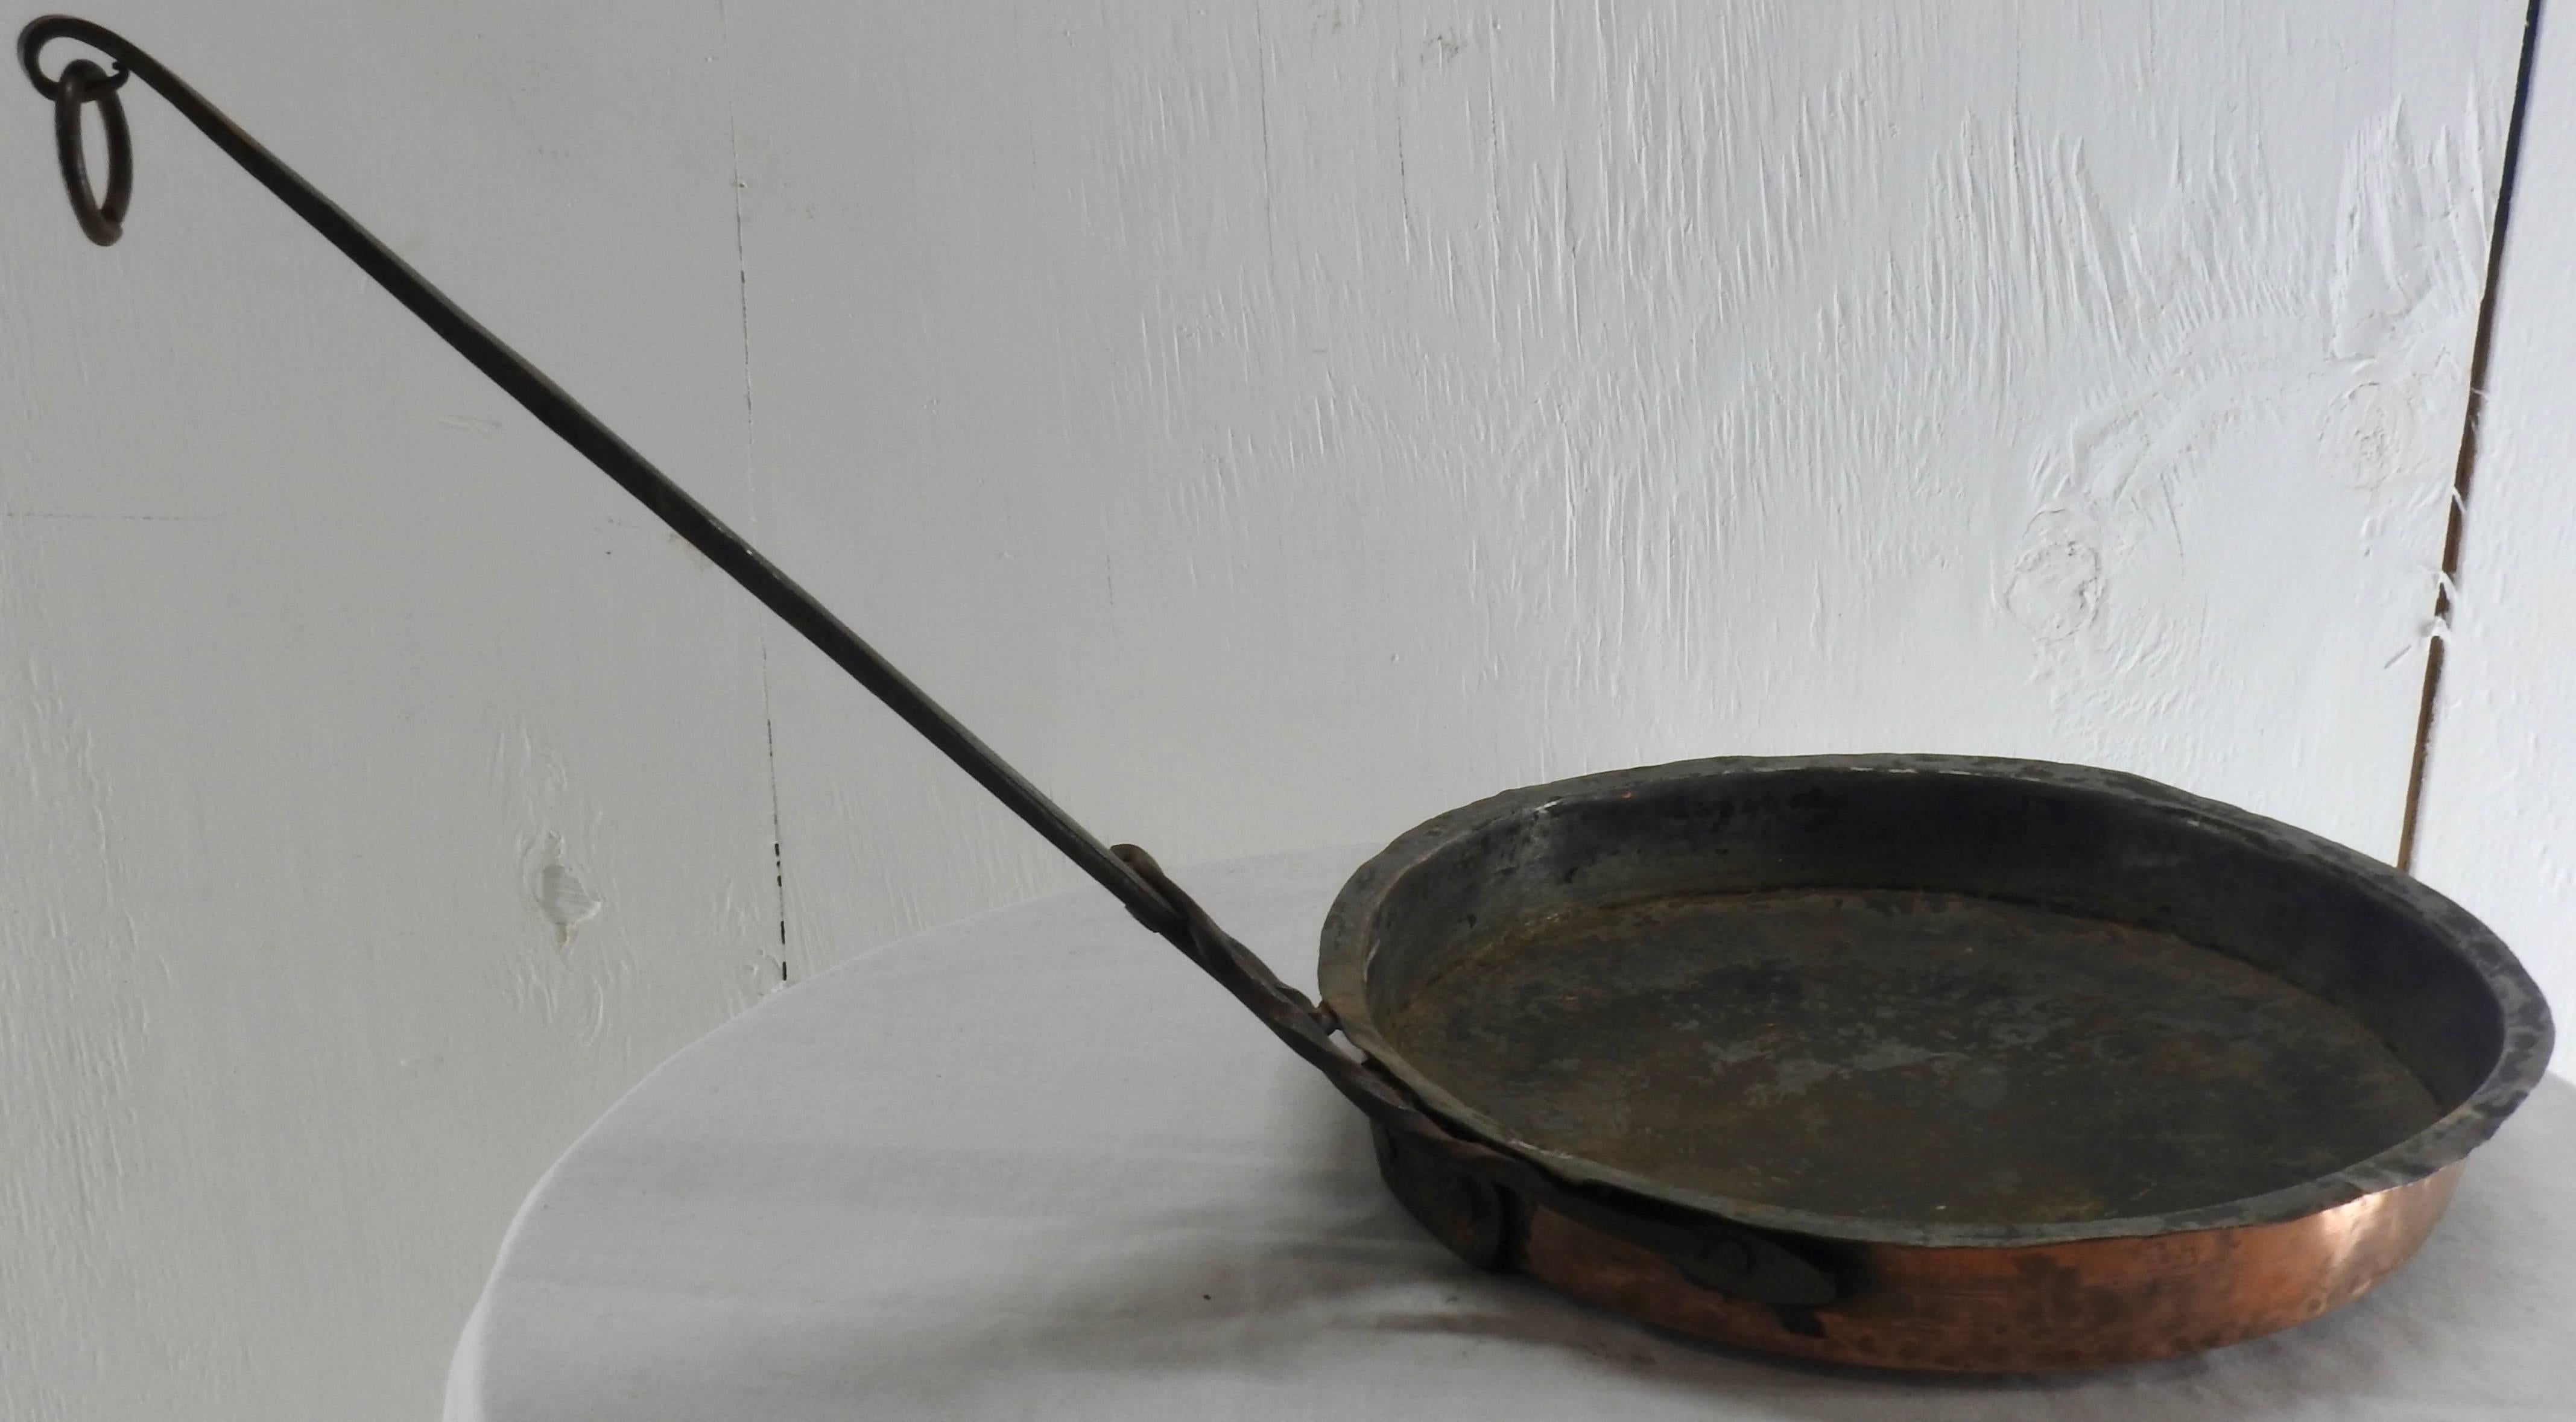 French jelly pan from France. Hand forged with a cast iron handle that has superb details. Loop on the long handle. Very heavy with a nice aged patina. 

Measures: Handle length 14.75.